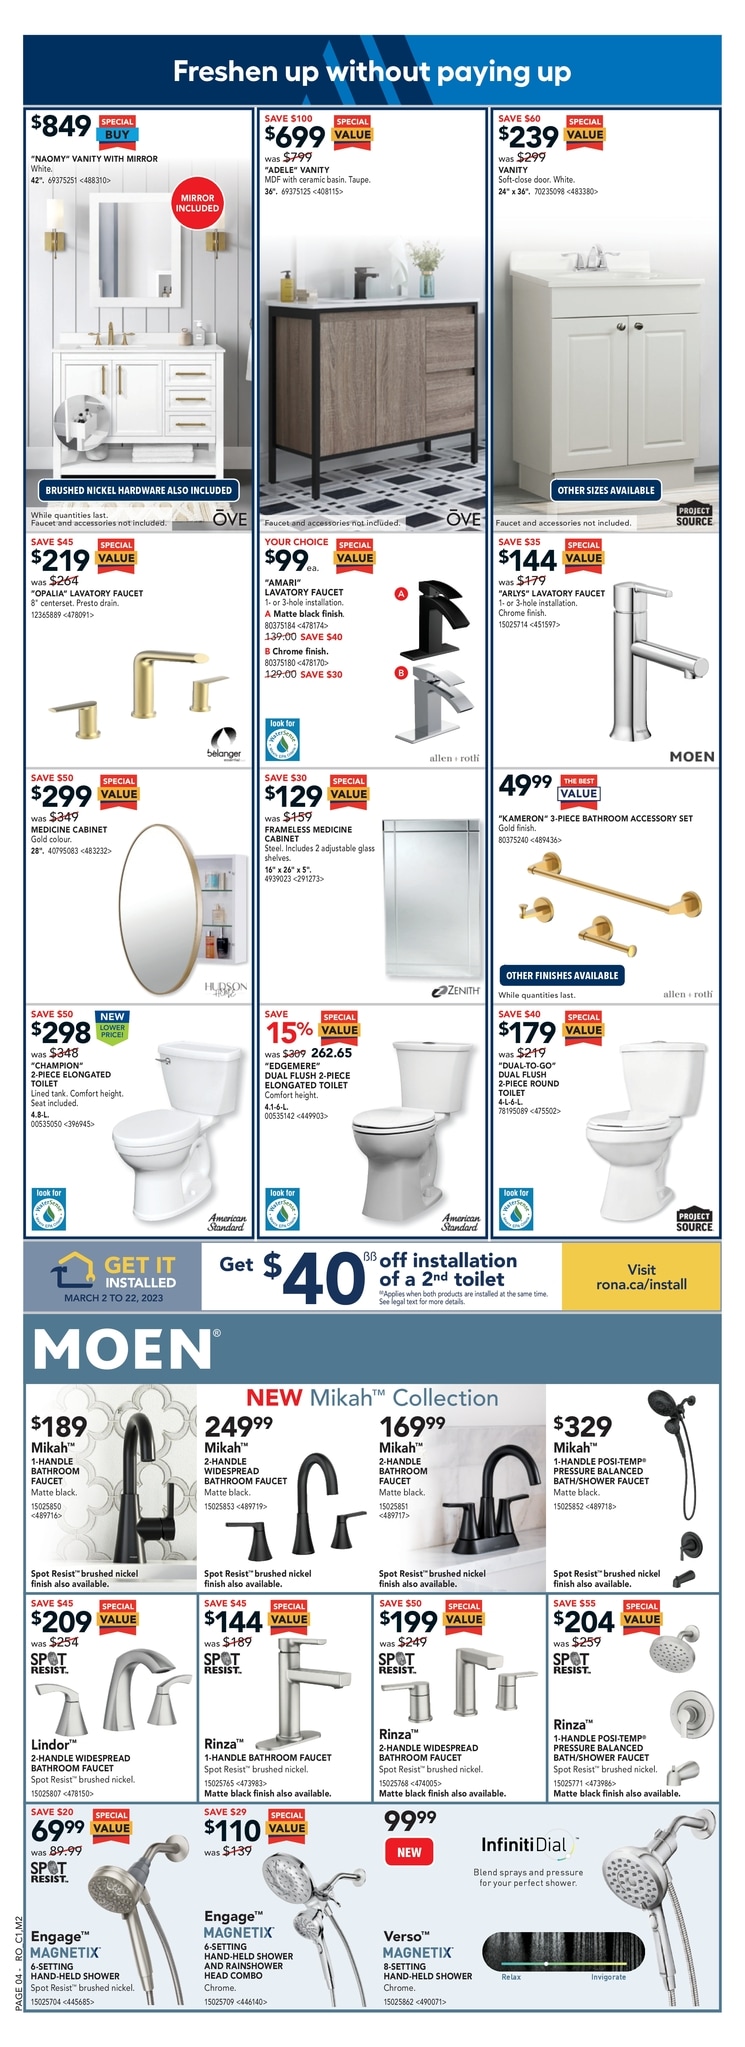 Rona - Weekly Flyer Specials - Page 4